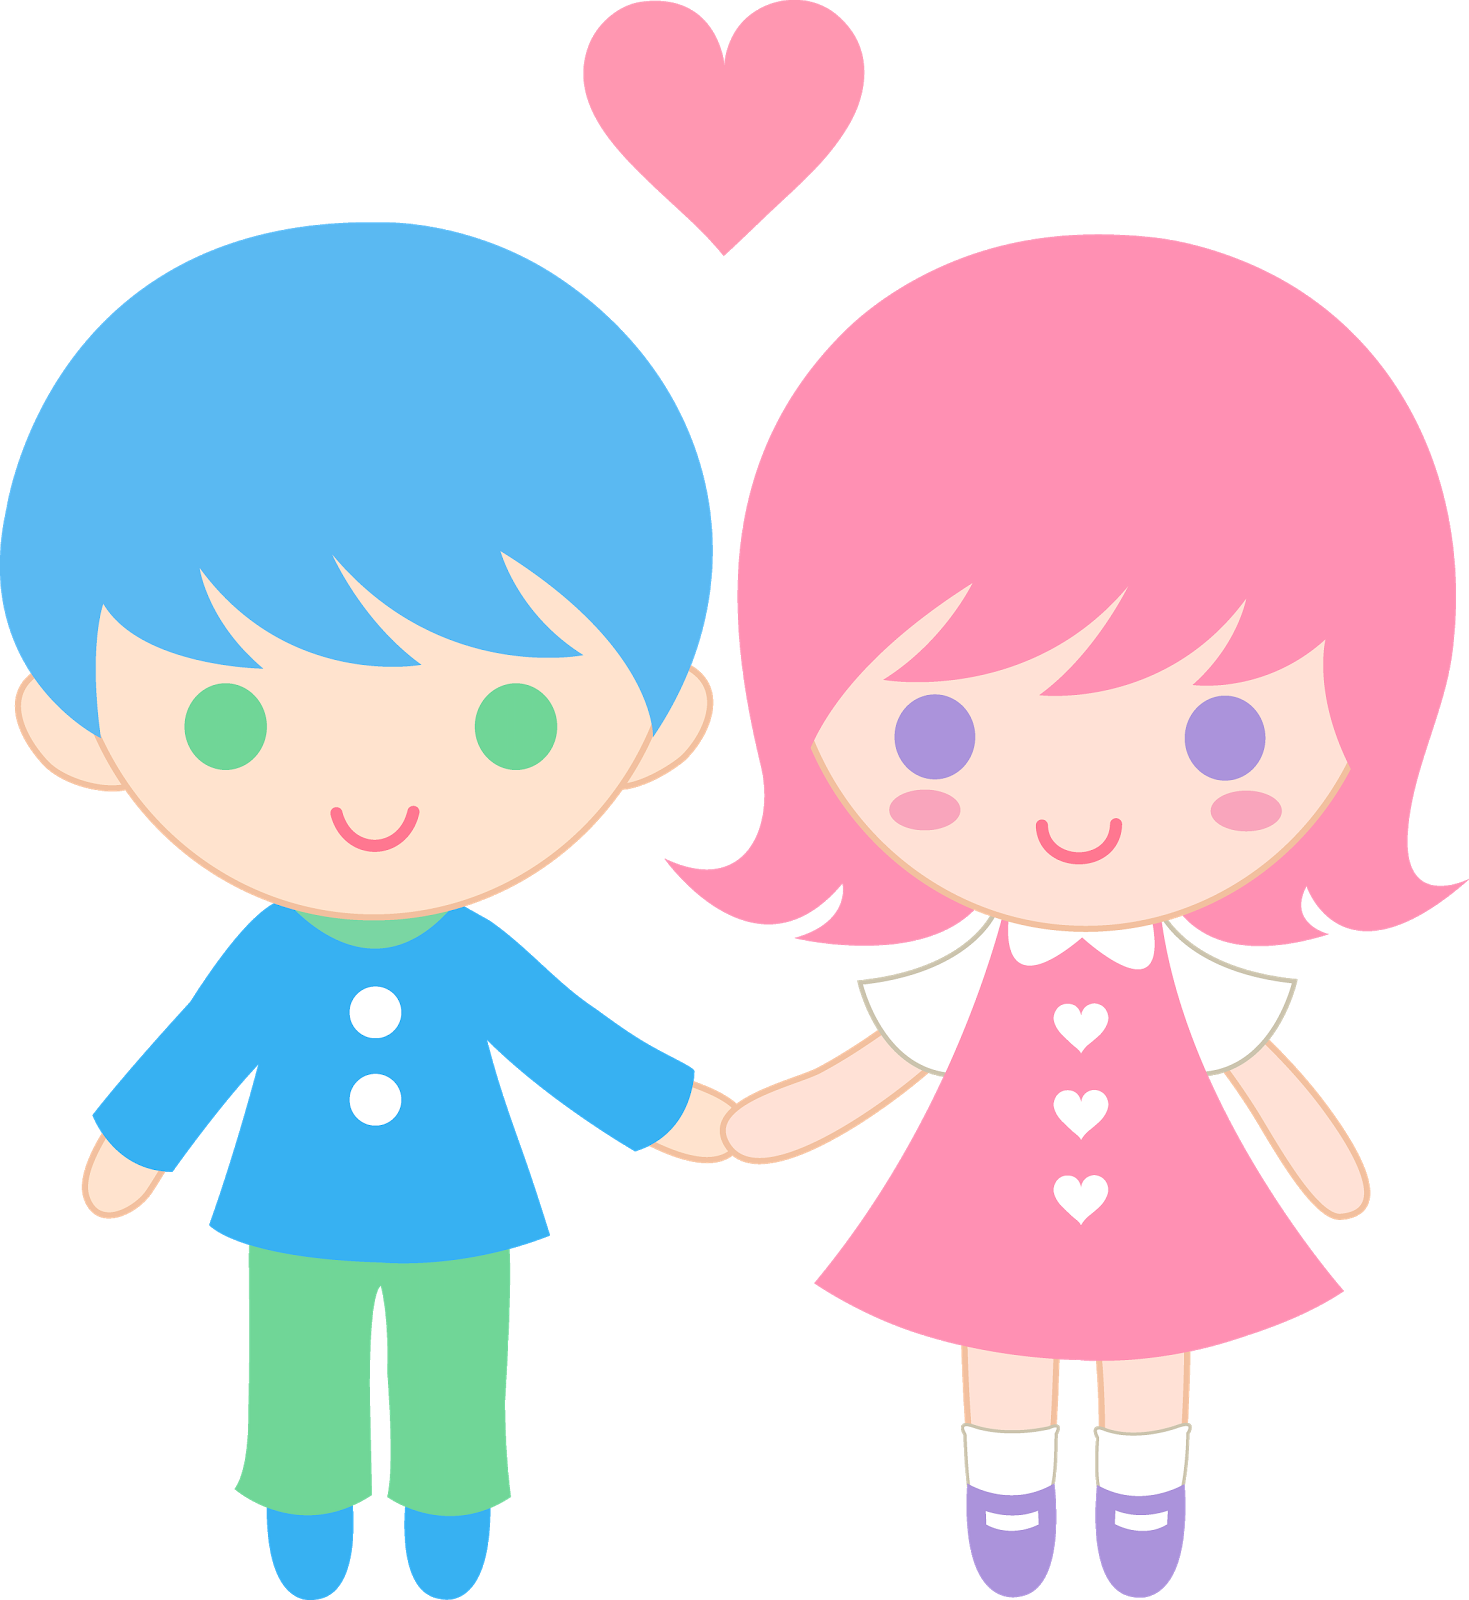 clipart of a boy and a girl - photo #21